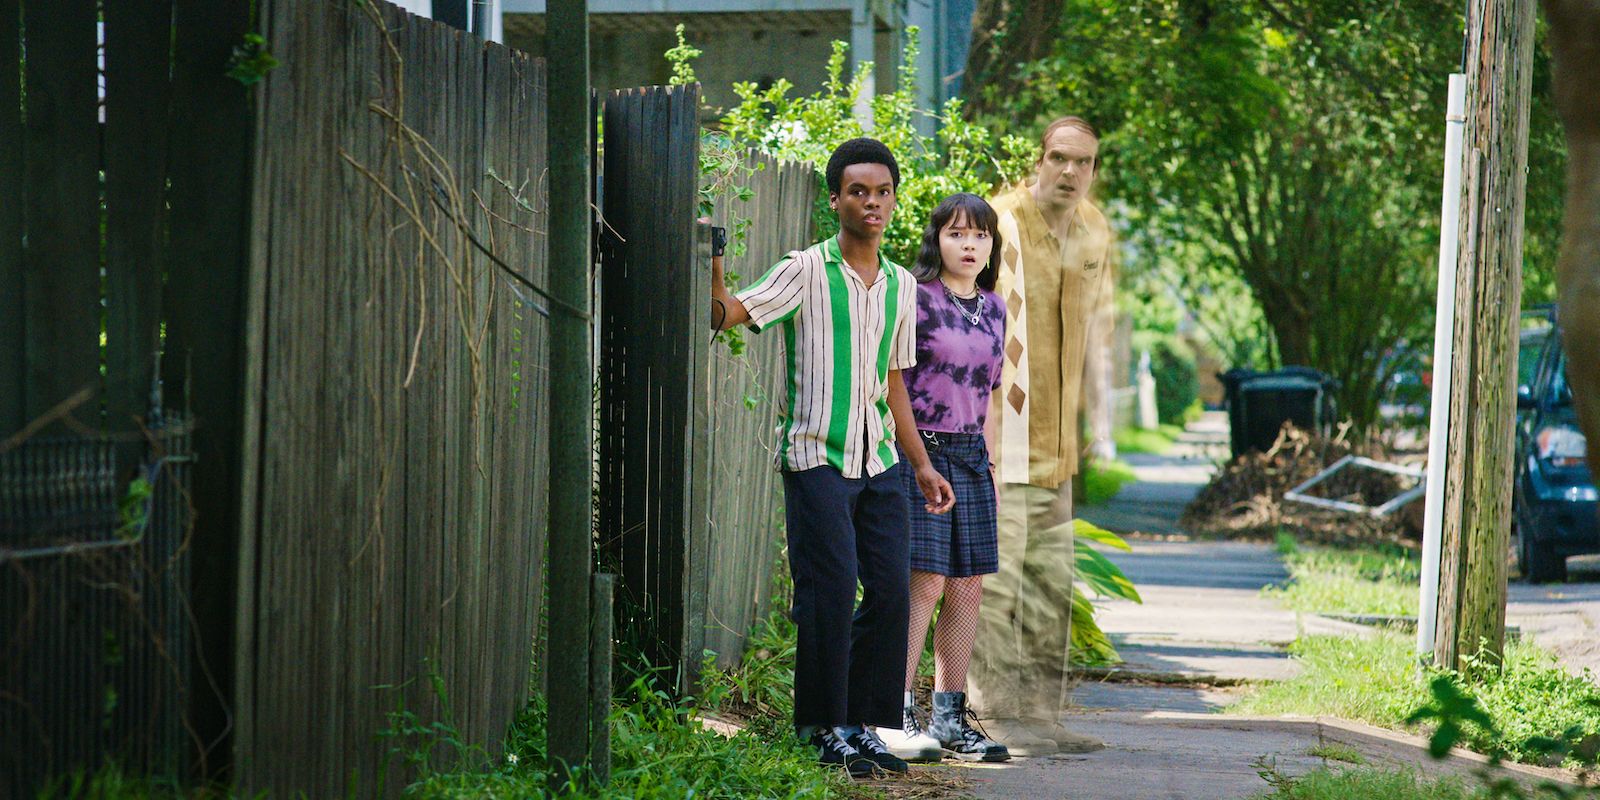 Jahi Winston, Isabella Russo, and David Harbour in We Have a Ghost